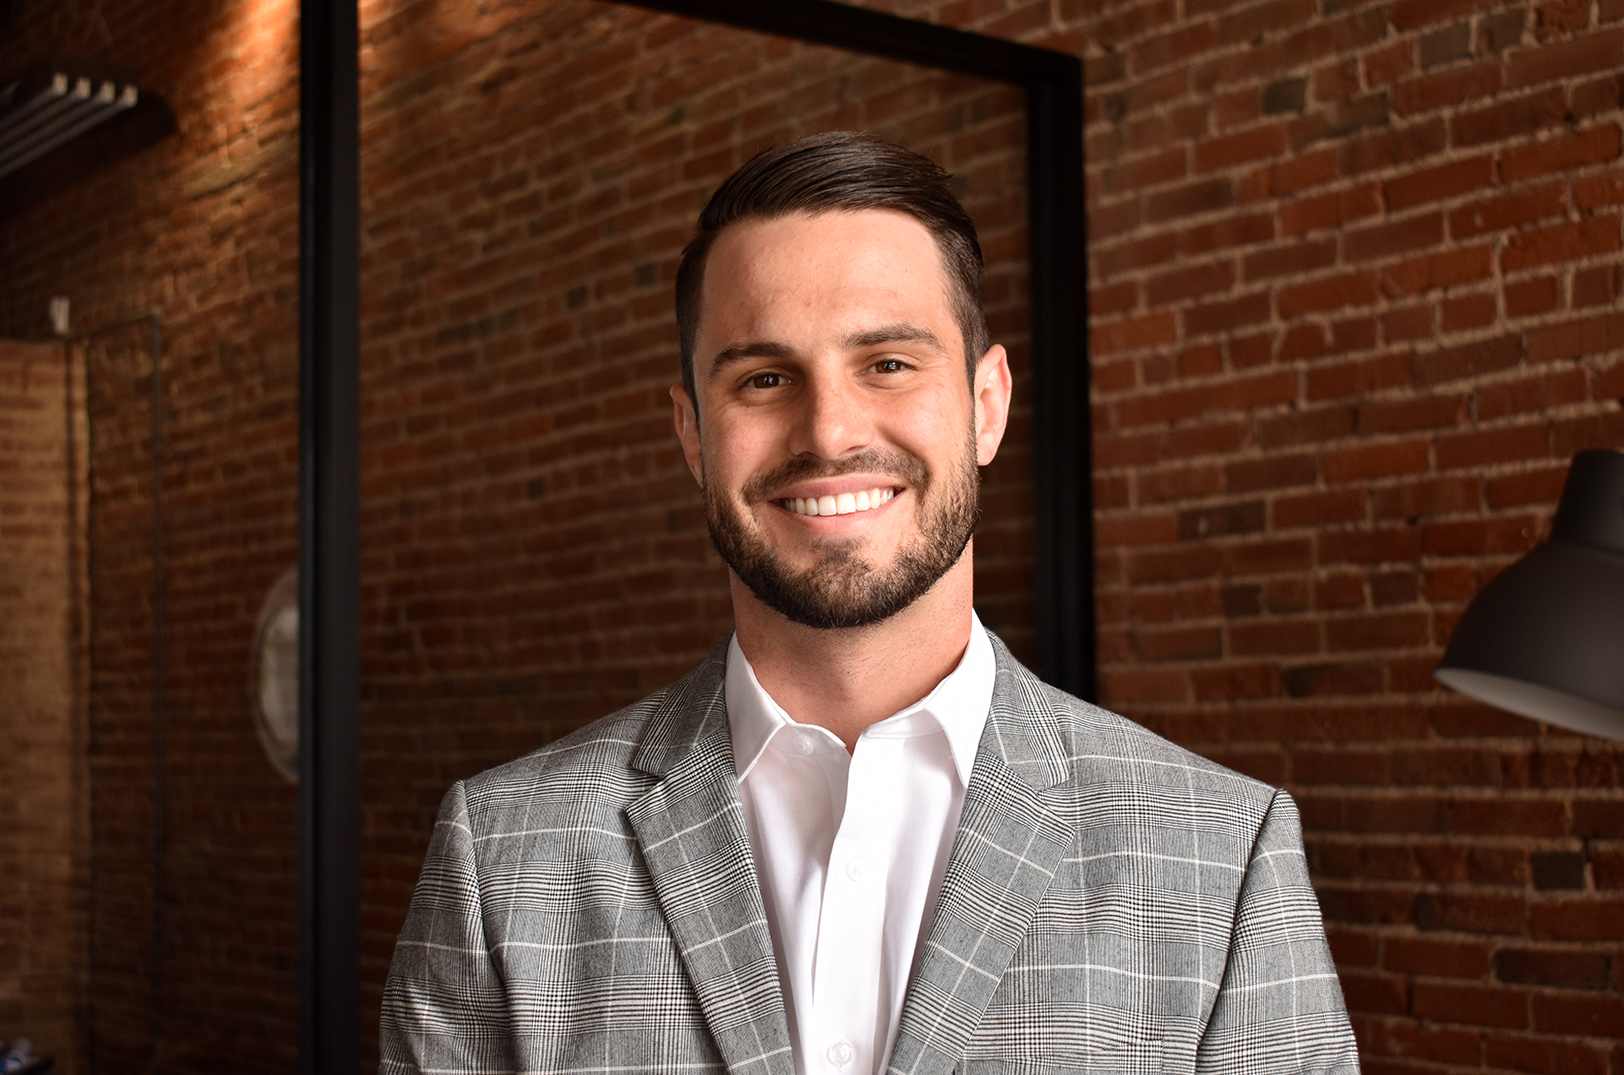 Community Builders to Watch: Emerson Hodes envisions KC as the next hotspot, loops in metro’s young professionals